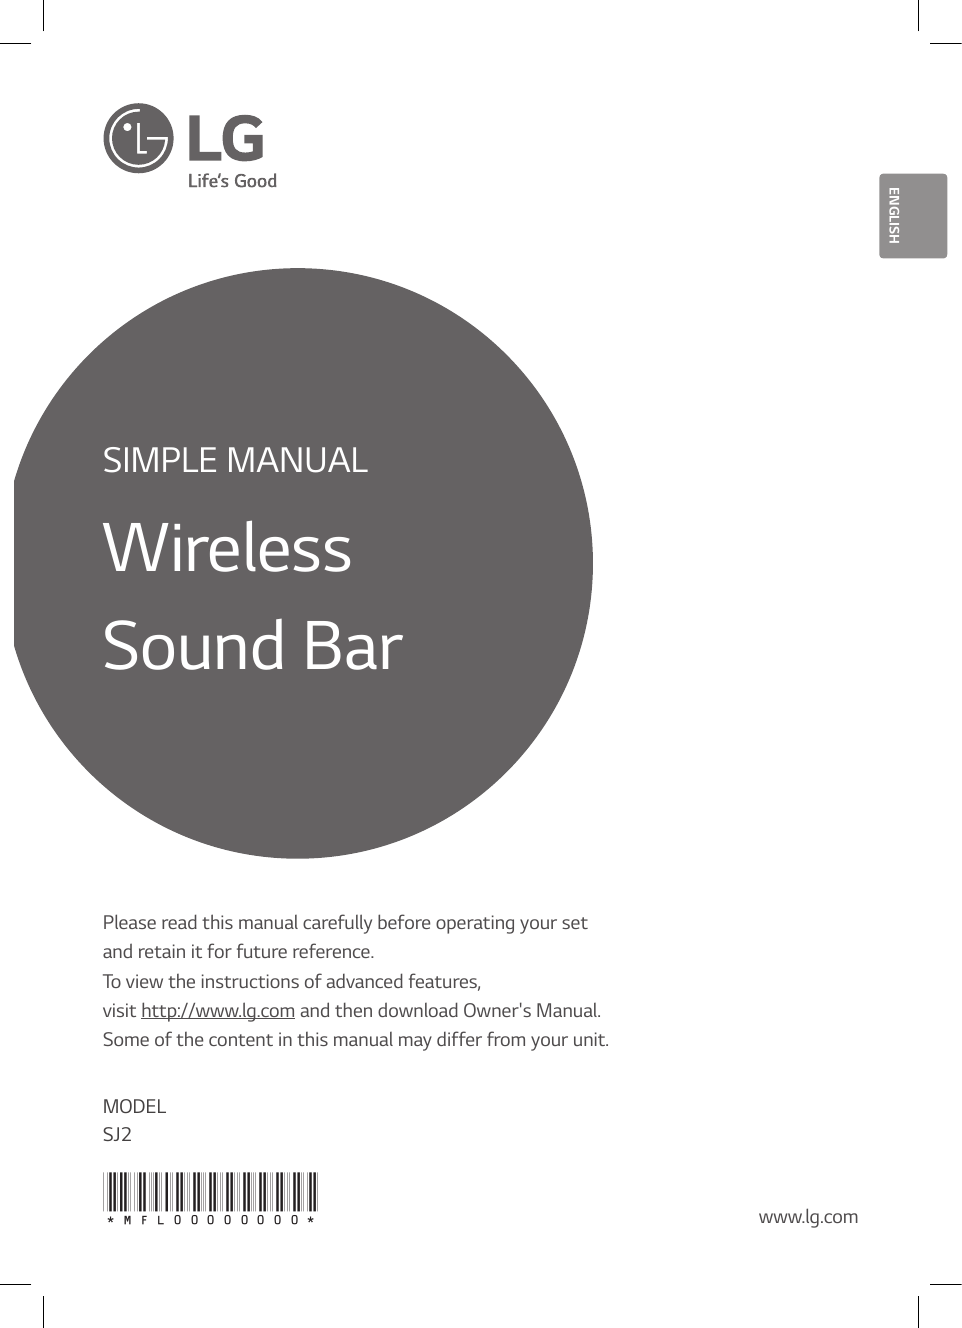 SIMPLE MANUALWirelessSound BarPlease read this manual carefully before operating your set  and retain it for future reference.To view the instructions of advanced features,  visit http://www.lg.com and then download Owner&apos;s Manual.  Some of the content in this manual may differ from your unit.SJ2www.lg.comENGLISHMODEL*MFL00000000*